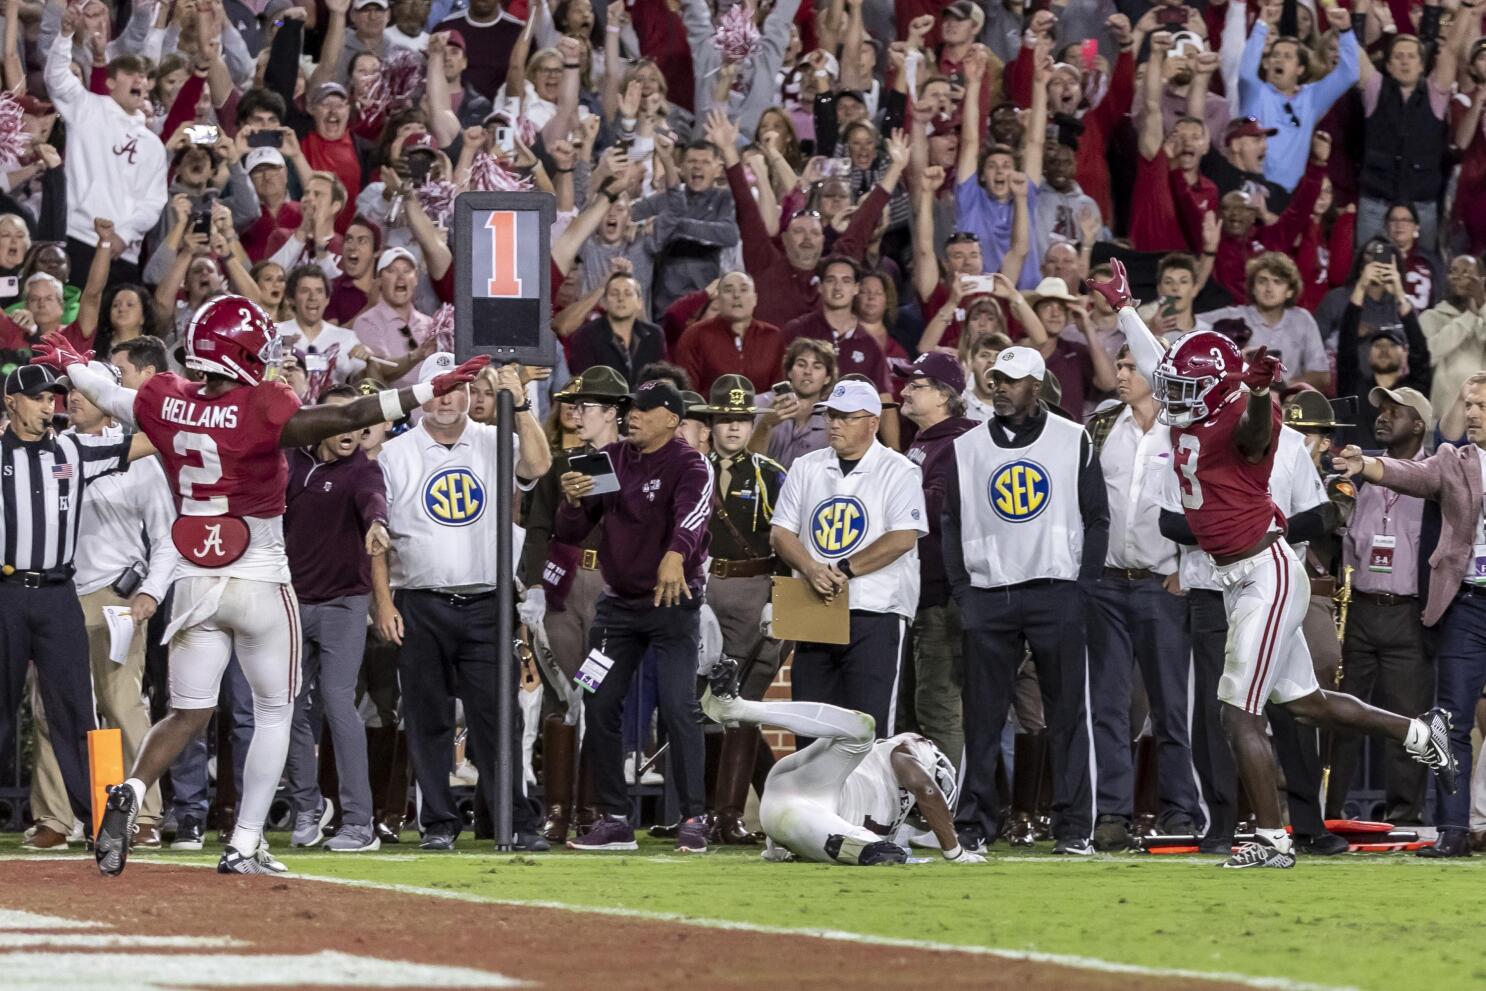 Alabama Crimson Tide: 13 is the Tide's lucky number